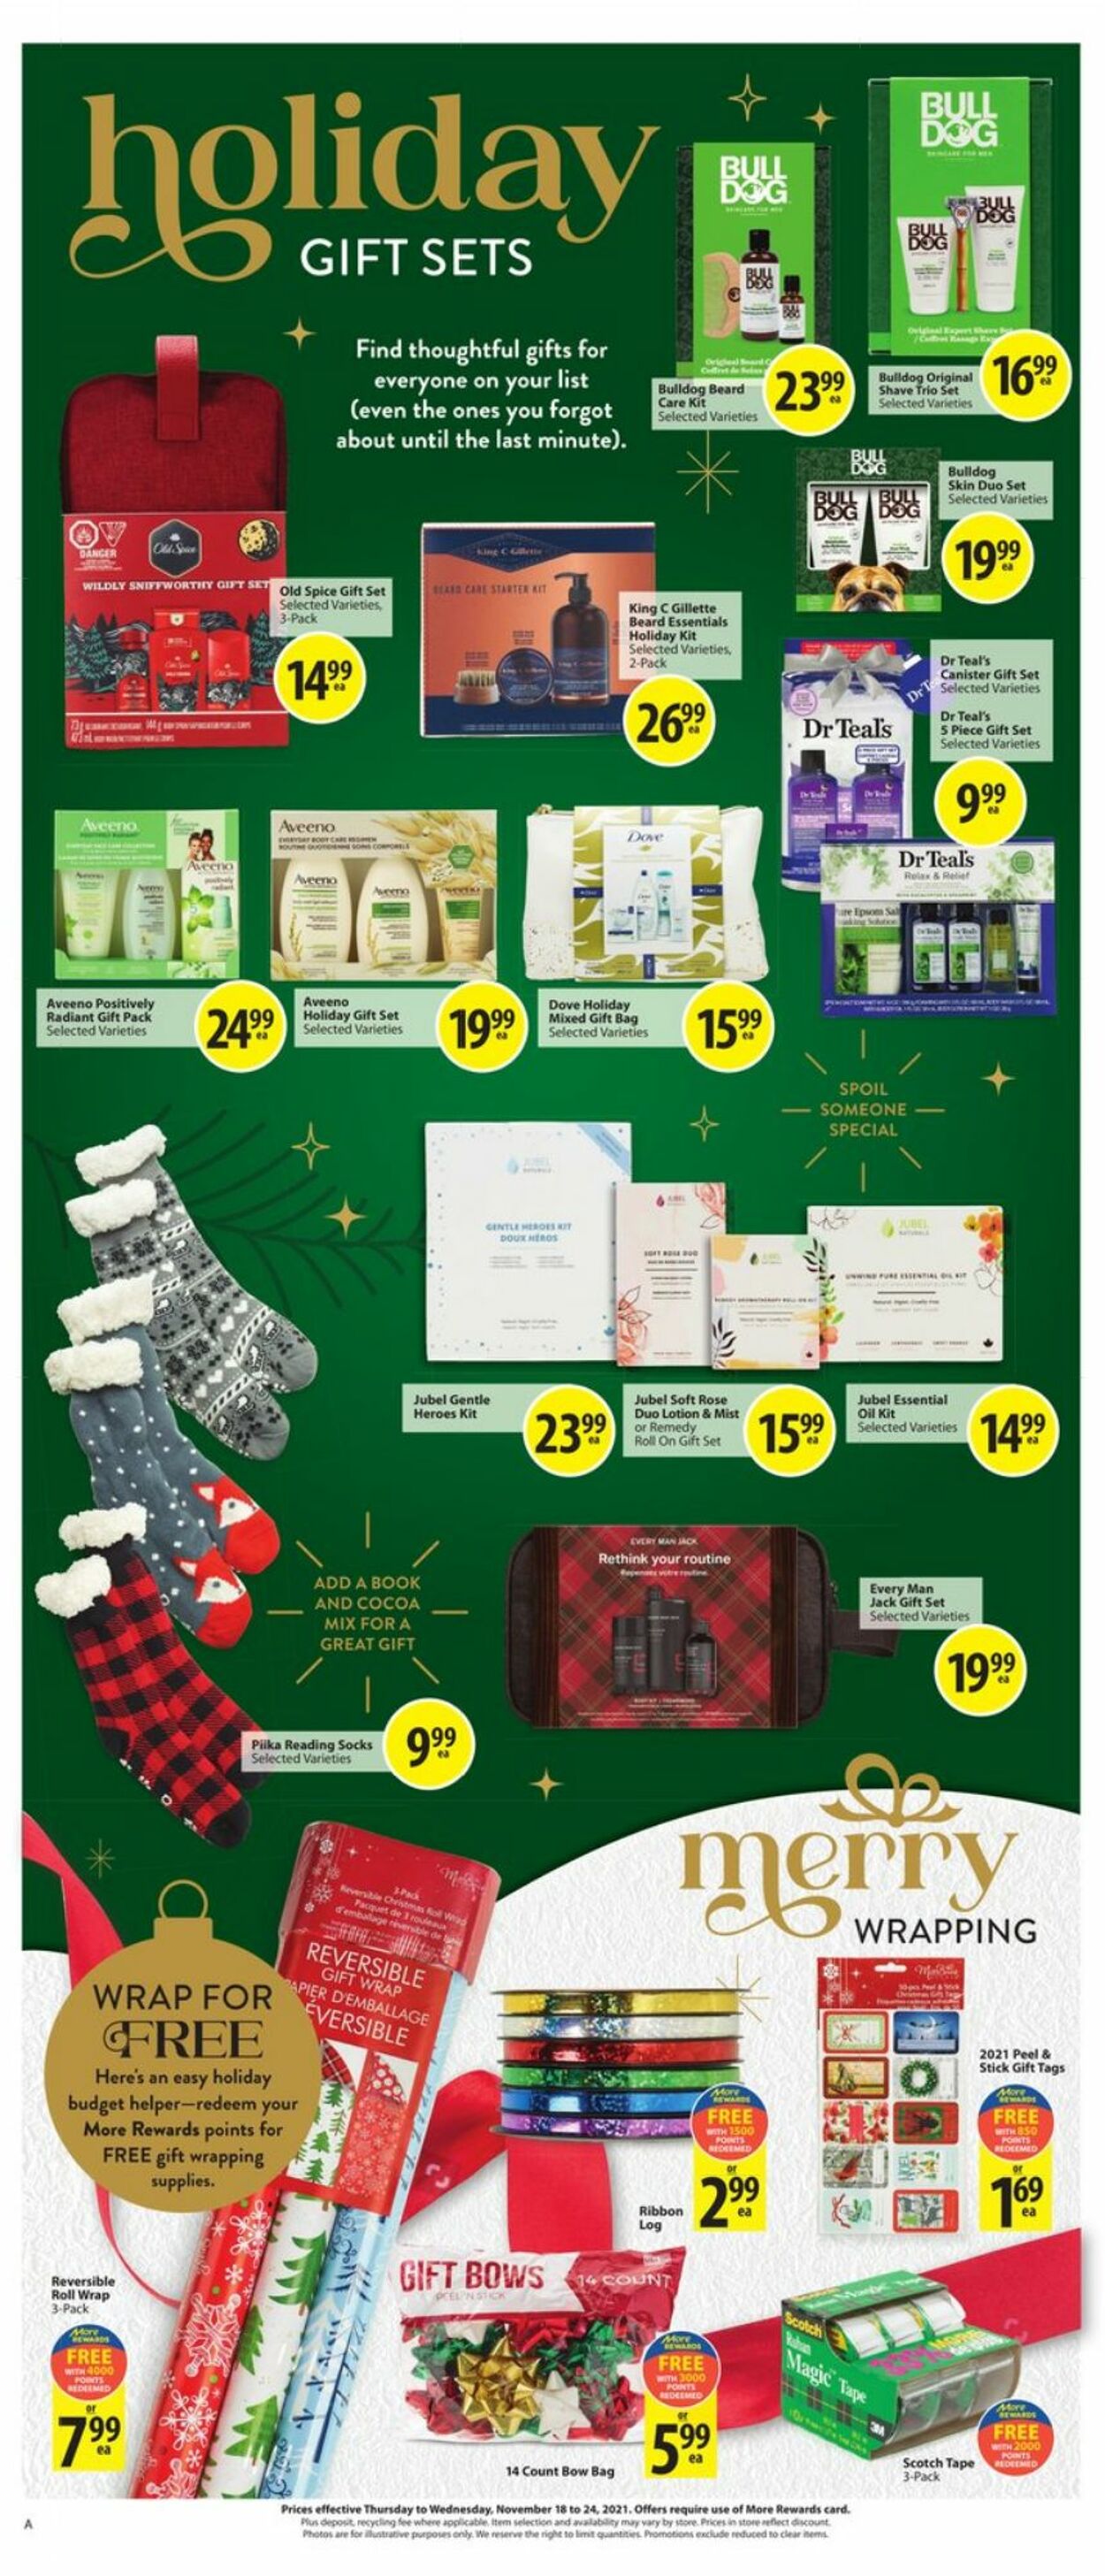 Flyer Save-On-Foods 18.11.2021 - 24.11.2021